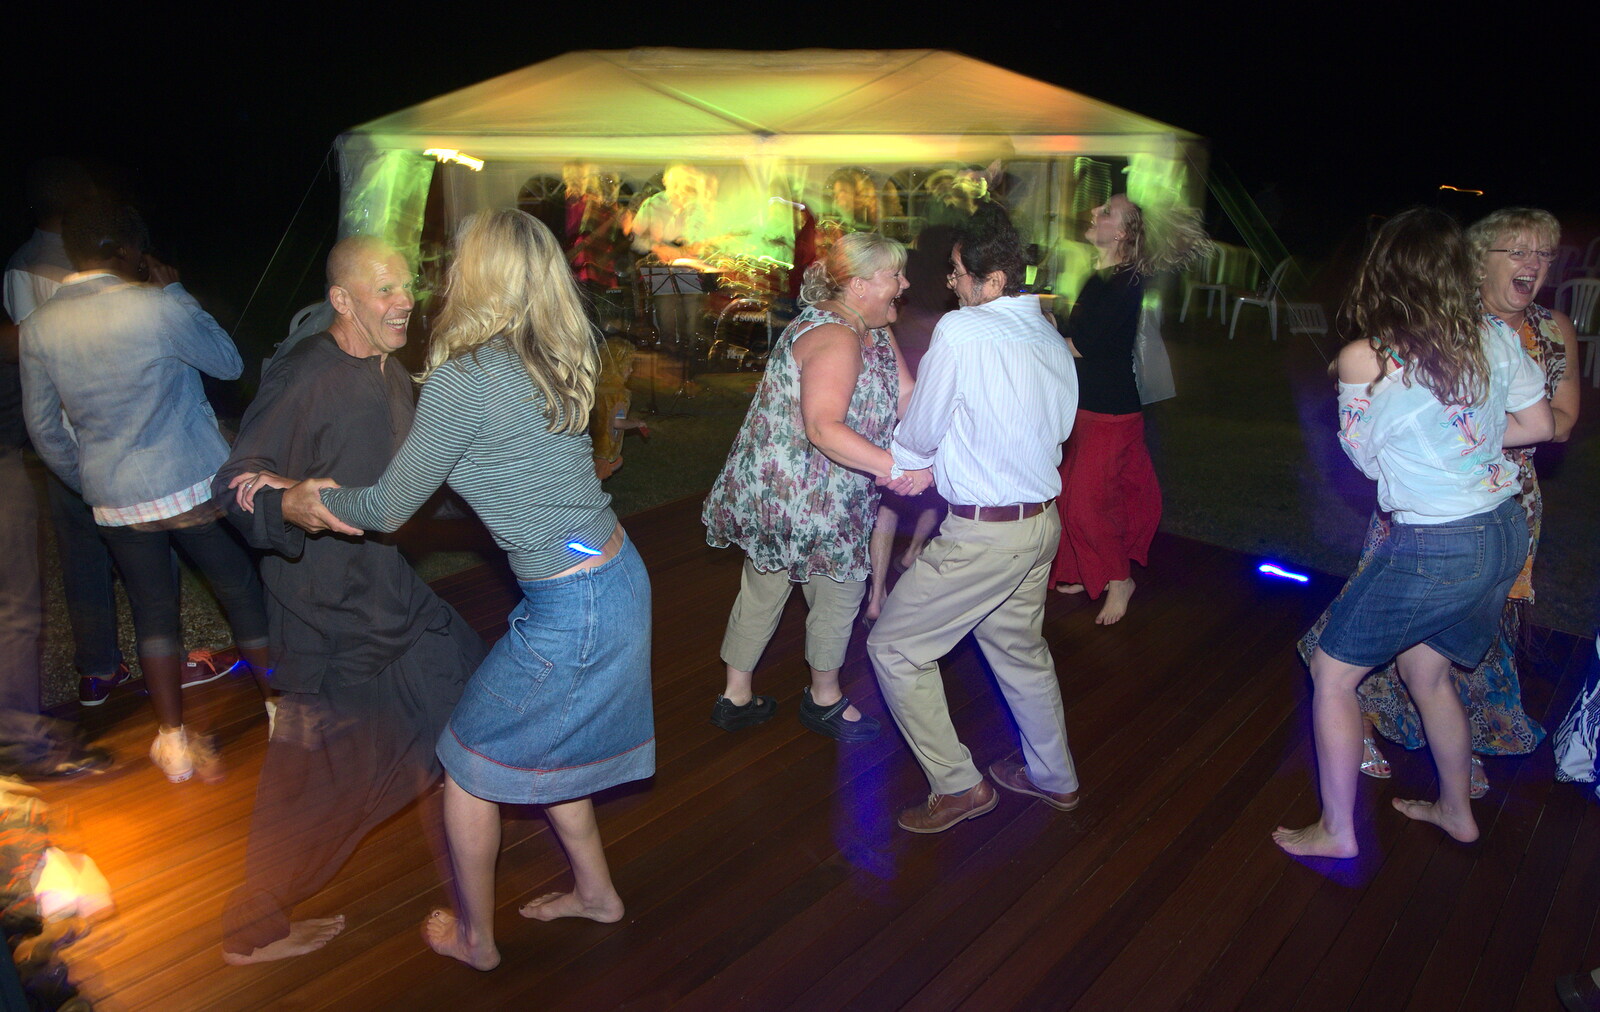 Dancing on the decking from Henry's 60th Birthday, Hethel, Norfolk - 3rd August 2013